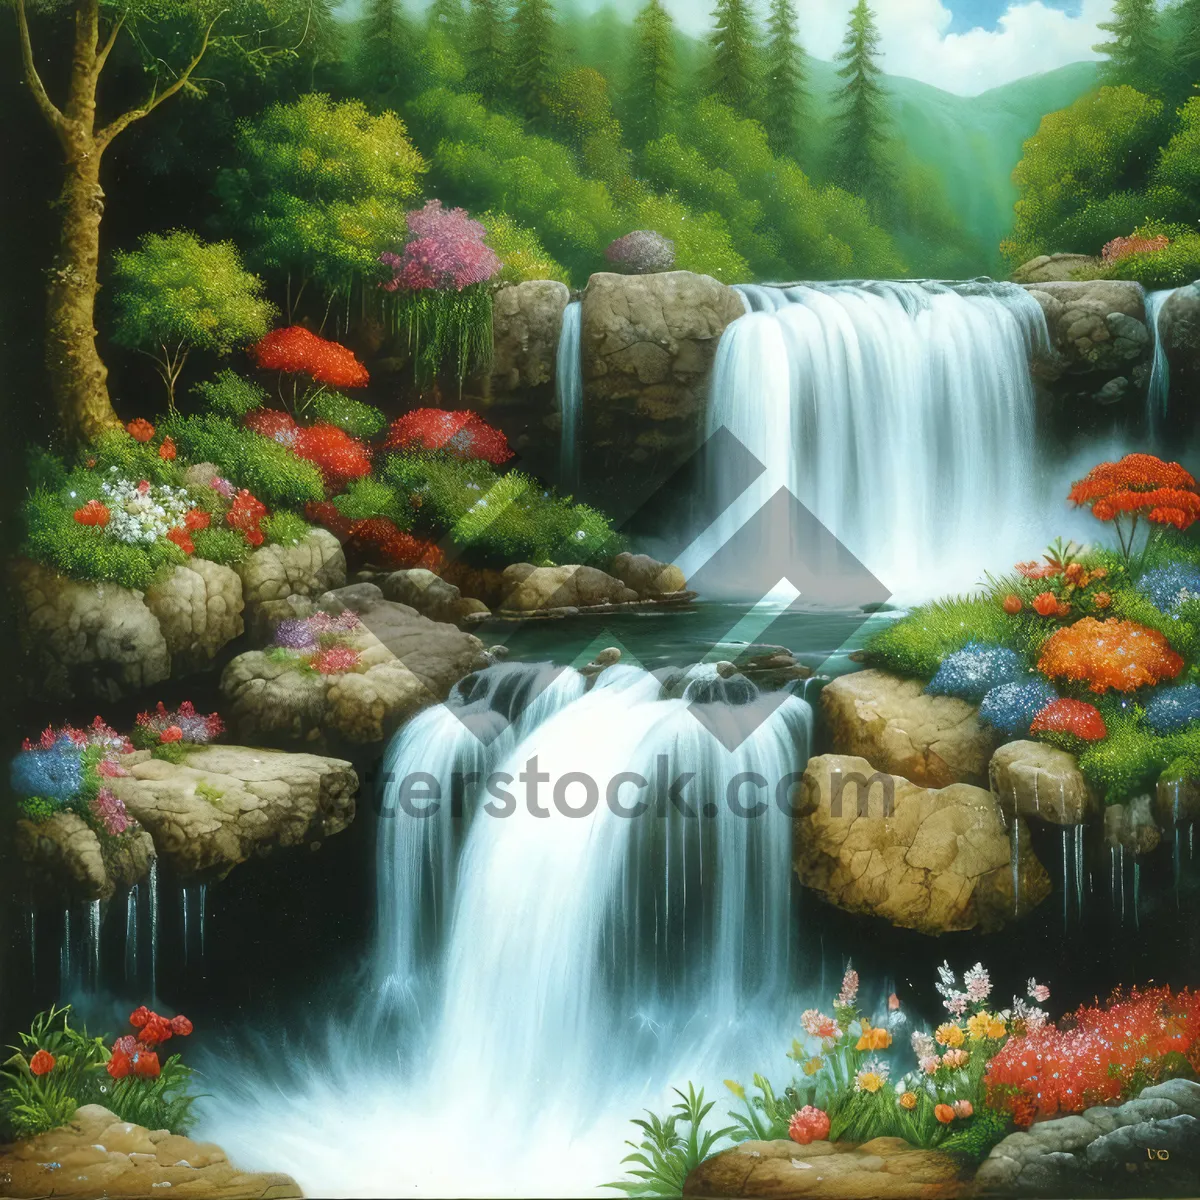 Picture of Enchanting Forest Waterfall in Lush Park Landscape